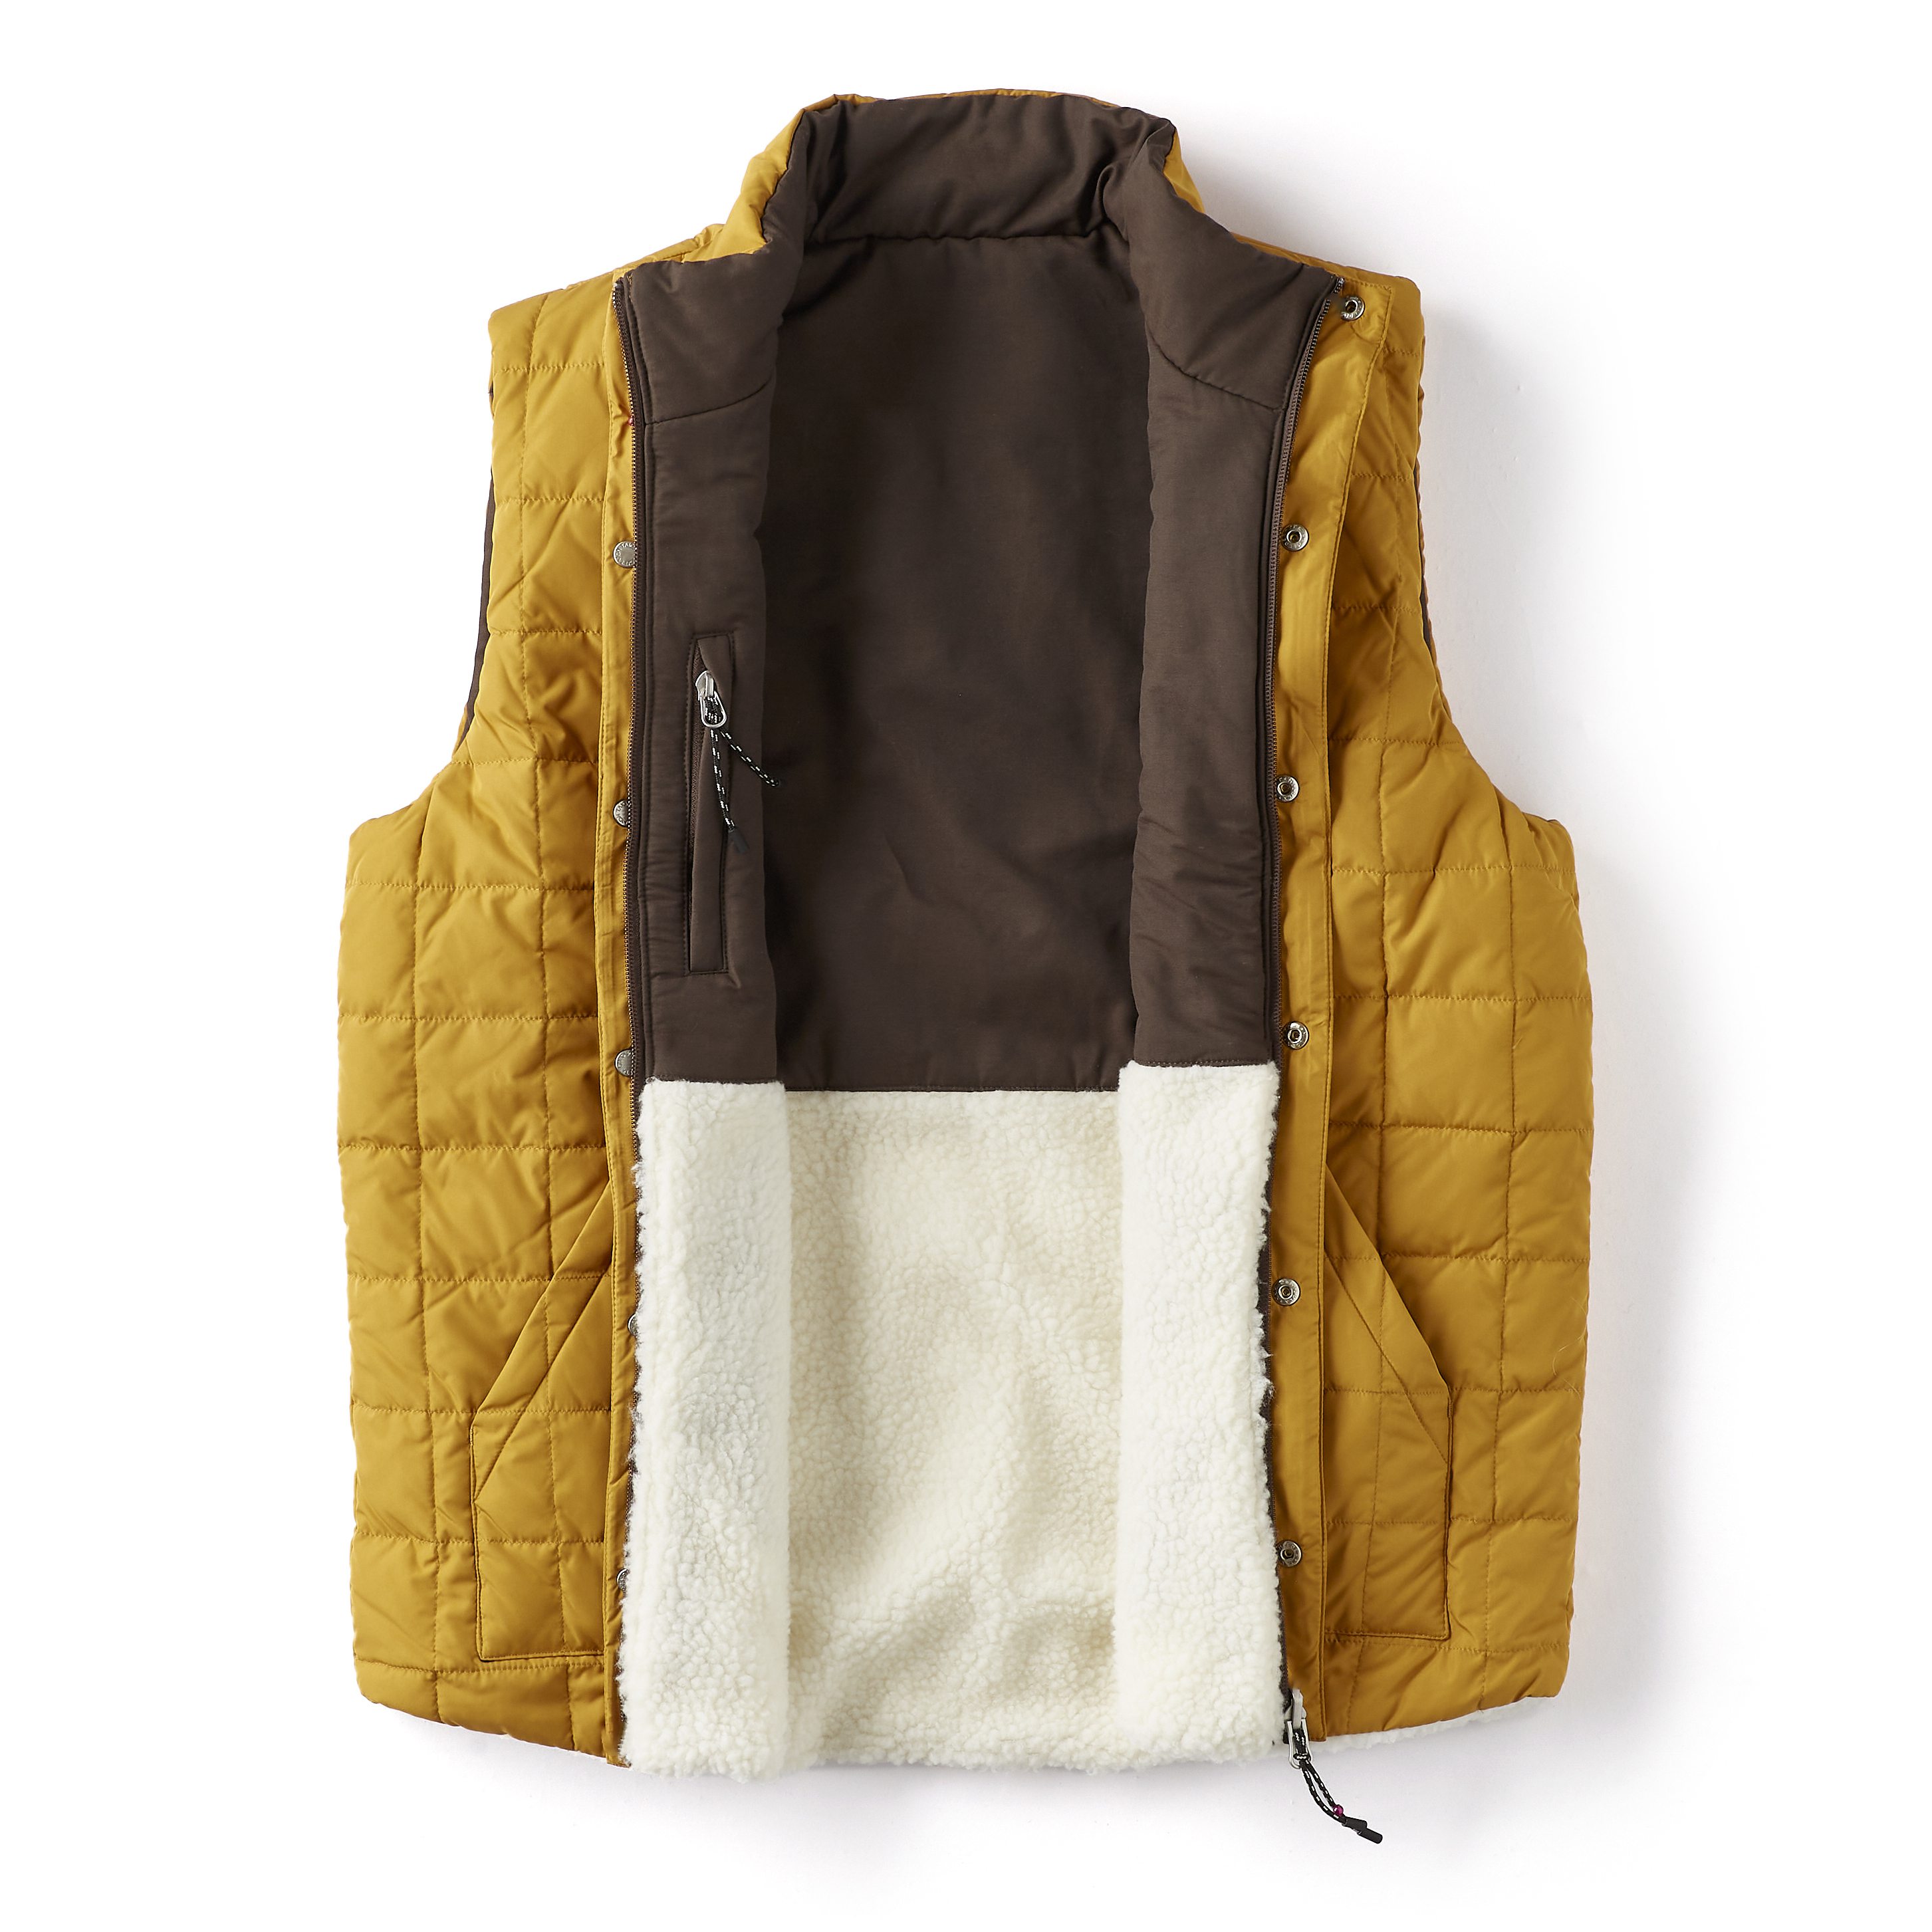 TAION Military Reversible Insulated Down Vest - Camel/Dark